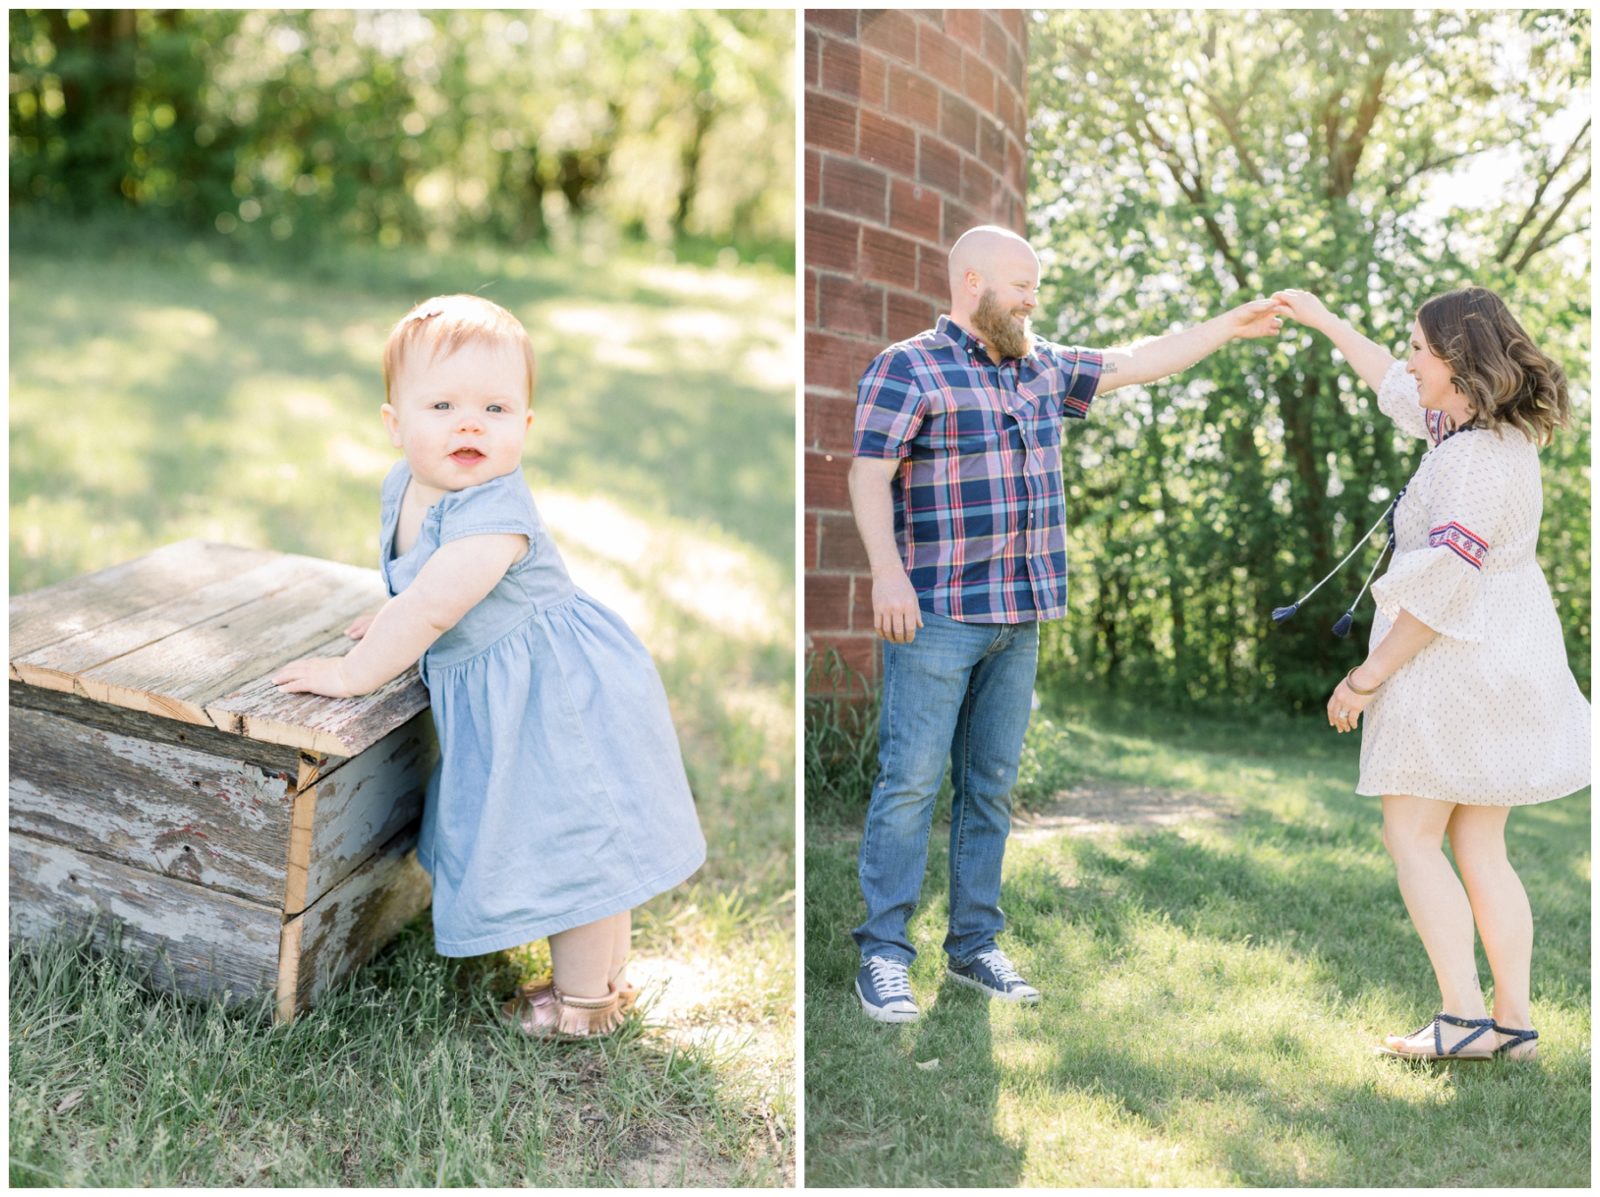 Two photos. One shows a baby girl standing. The other shows a couple dancing.